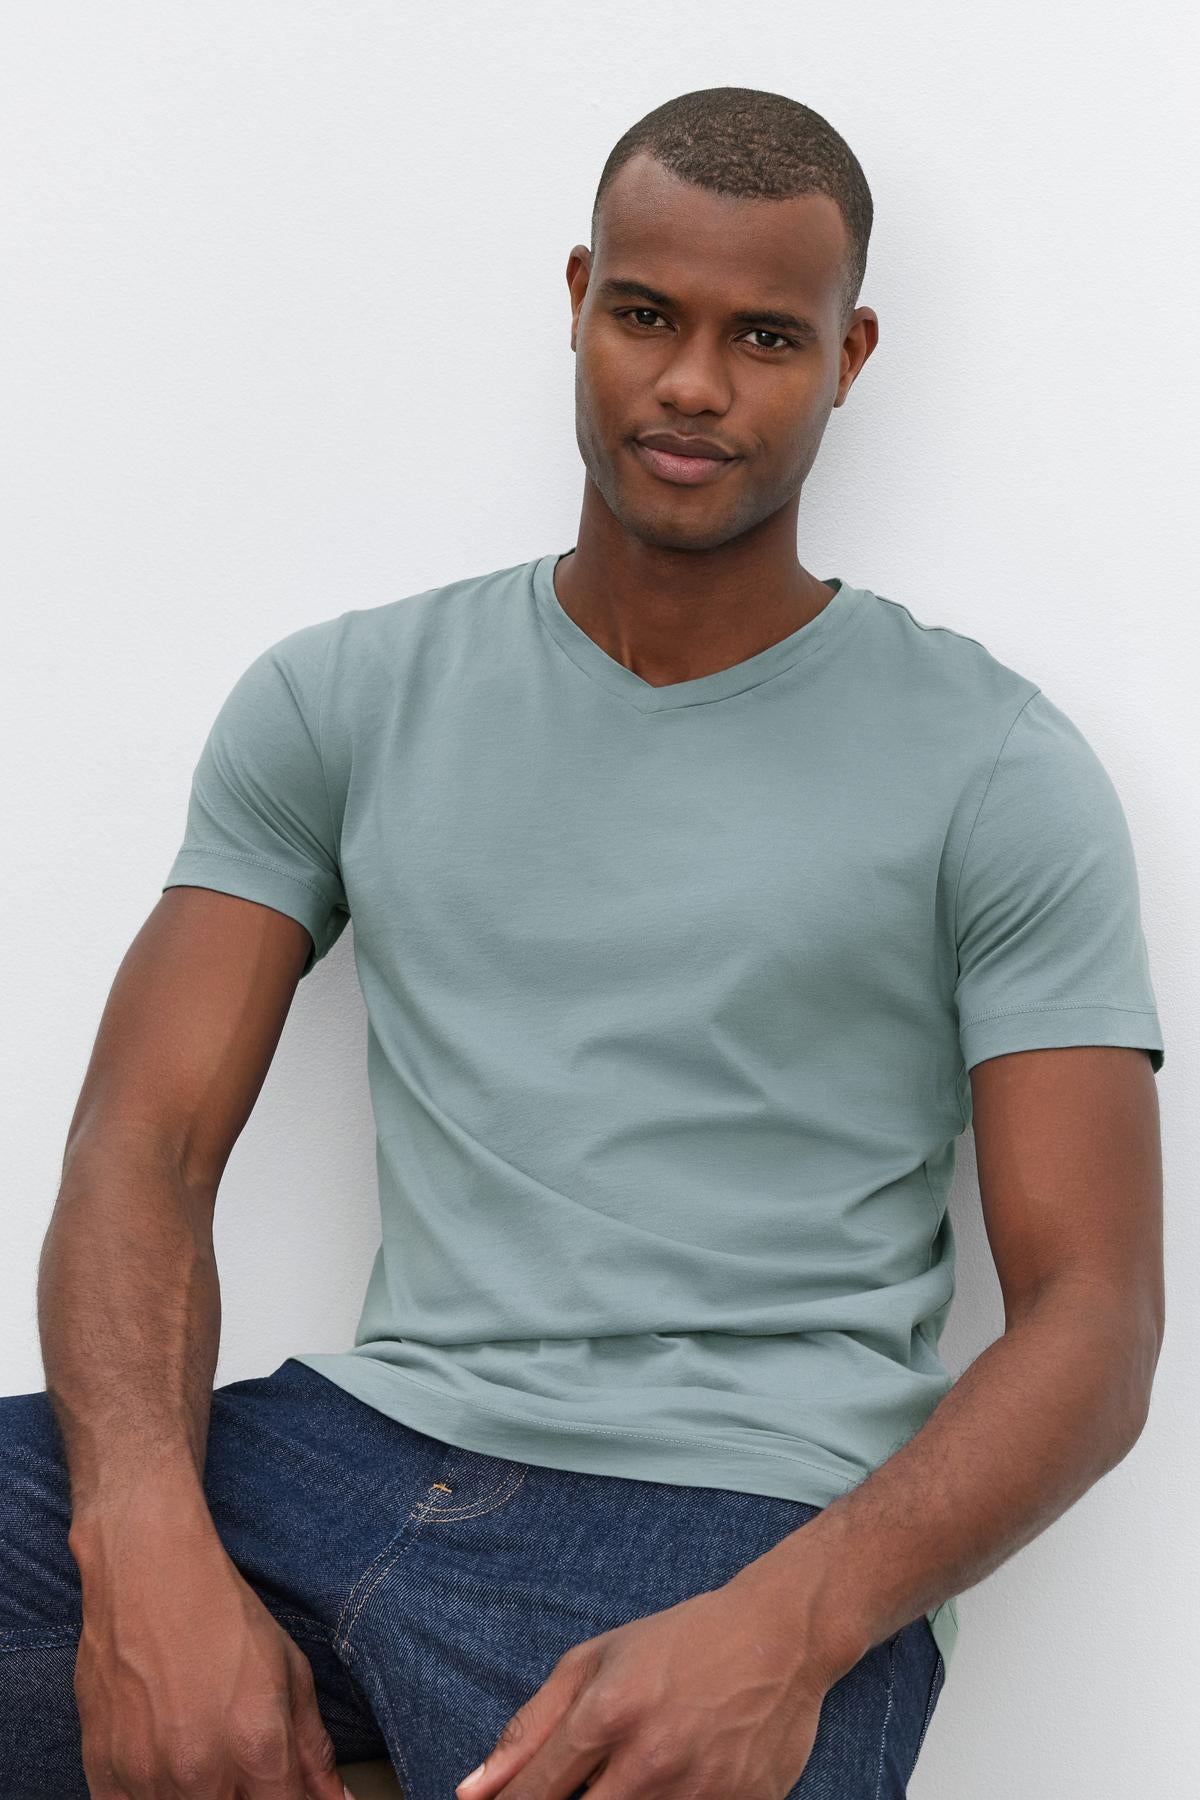 A man wearing a light green SAMSEN TEE by Velvet by Graham & Spencer with a v-neckline and dark blue jeans poses sitting against a plain white background, perfect for everyday wear.-37409982578881